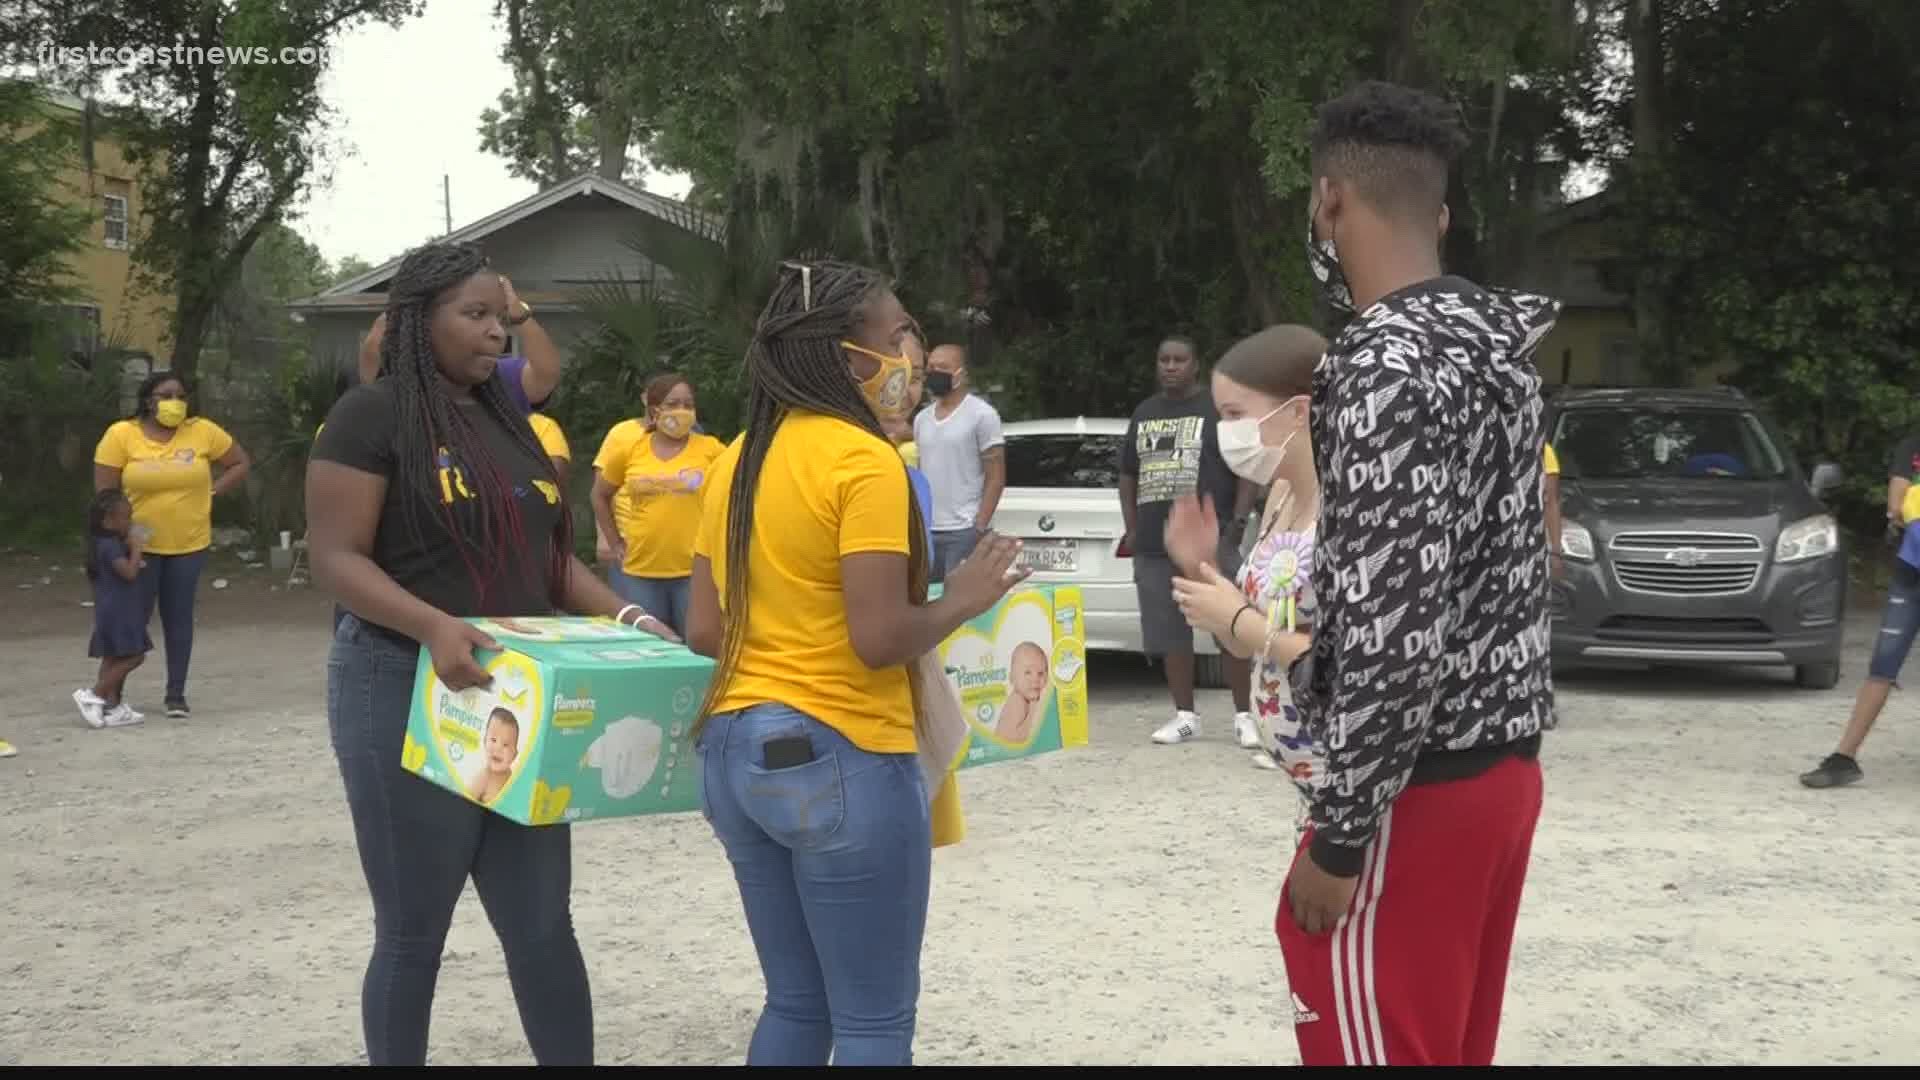 The event was held for seven soon-to-be moms in Jacksonville to help them with basic necessities for a new baby.